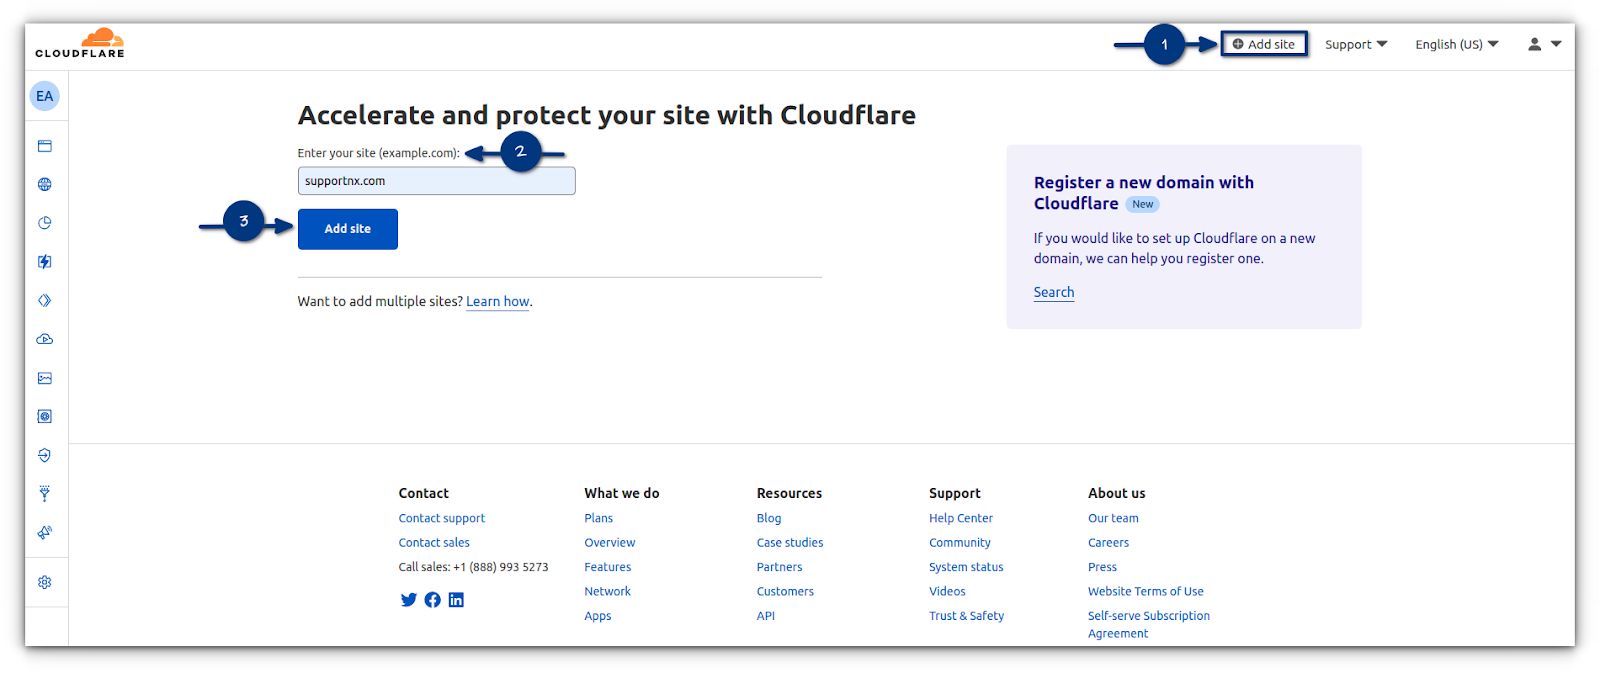 Once you have created an account at Cloudflare, find the +Add Site button at the top right of the screen. Enter your domain name into the box.